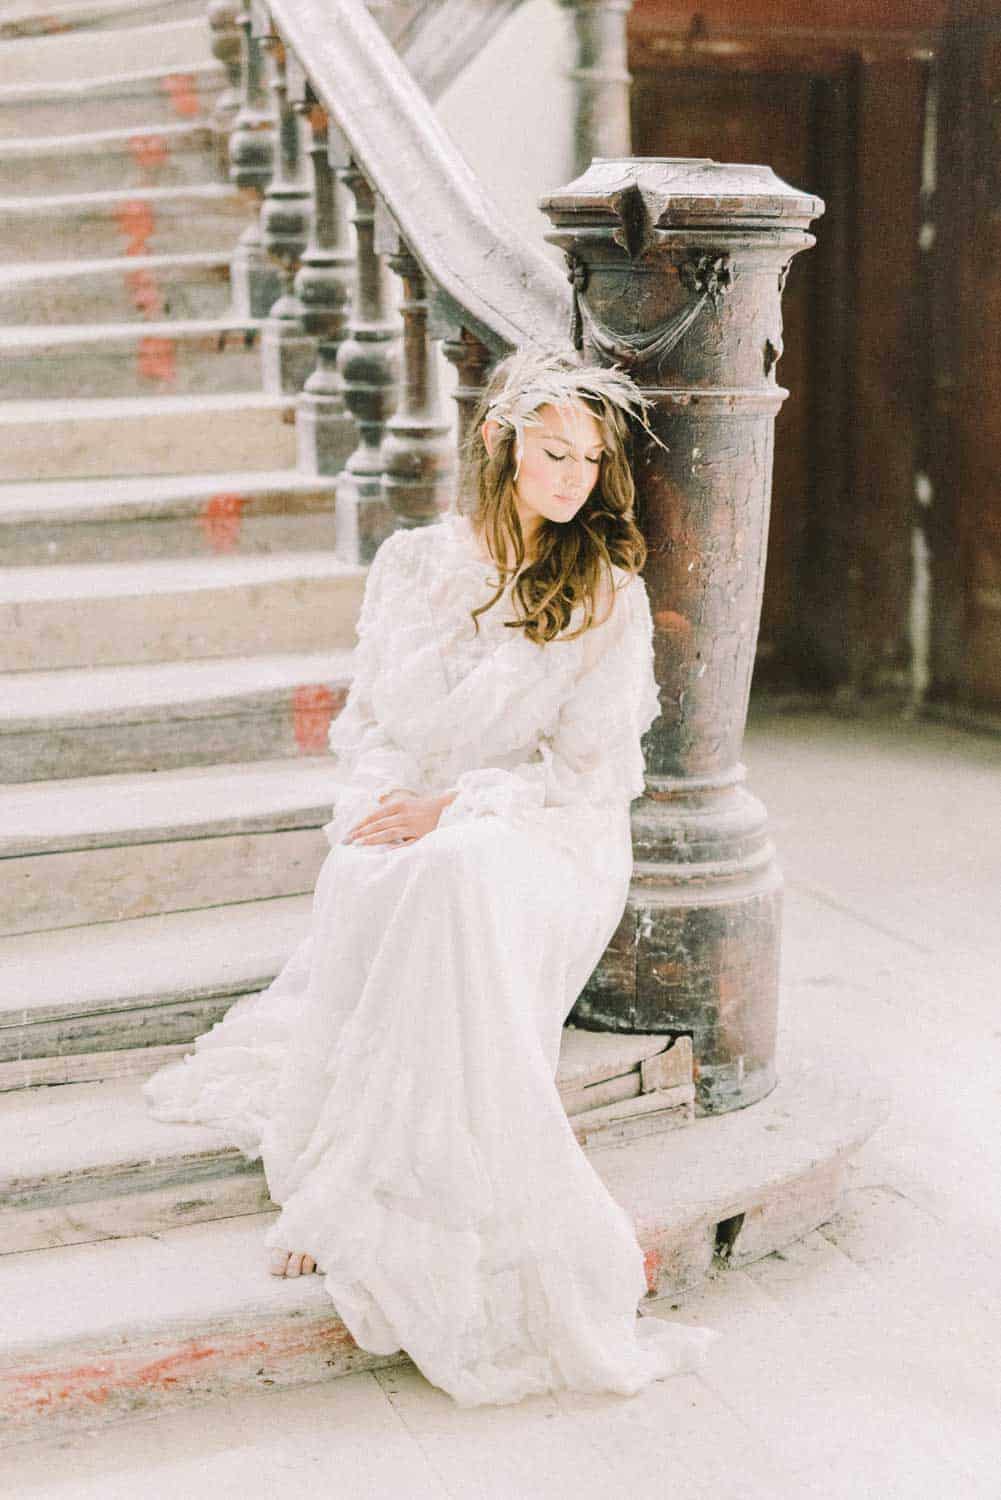 A Bride sitting on a staircase